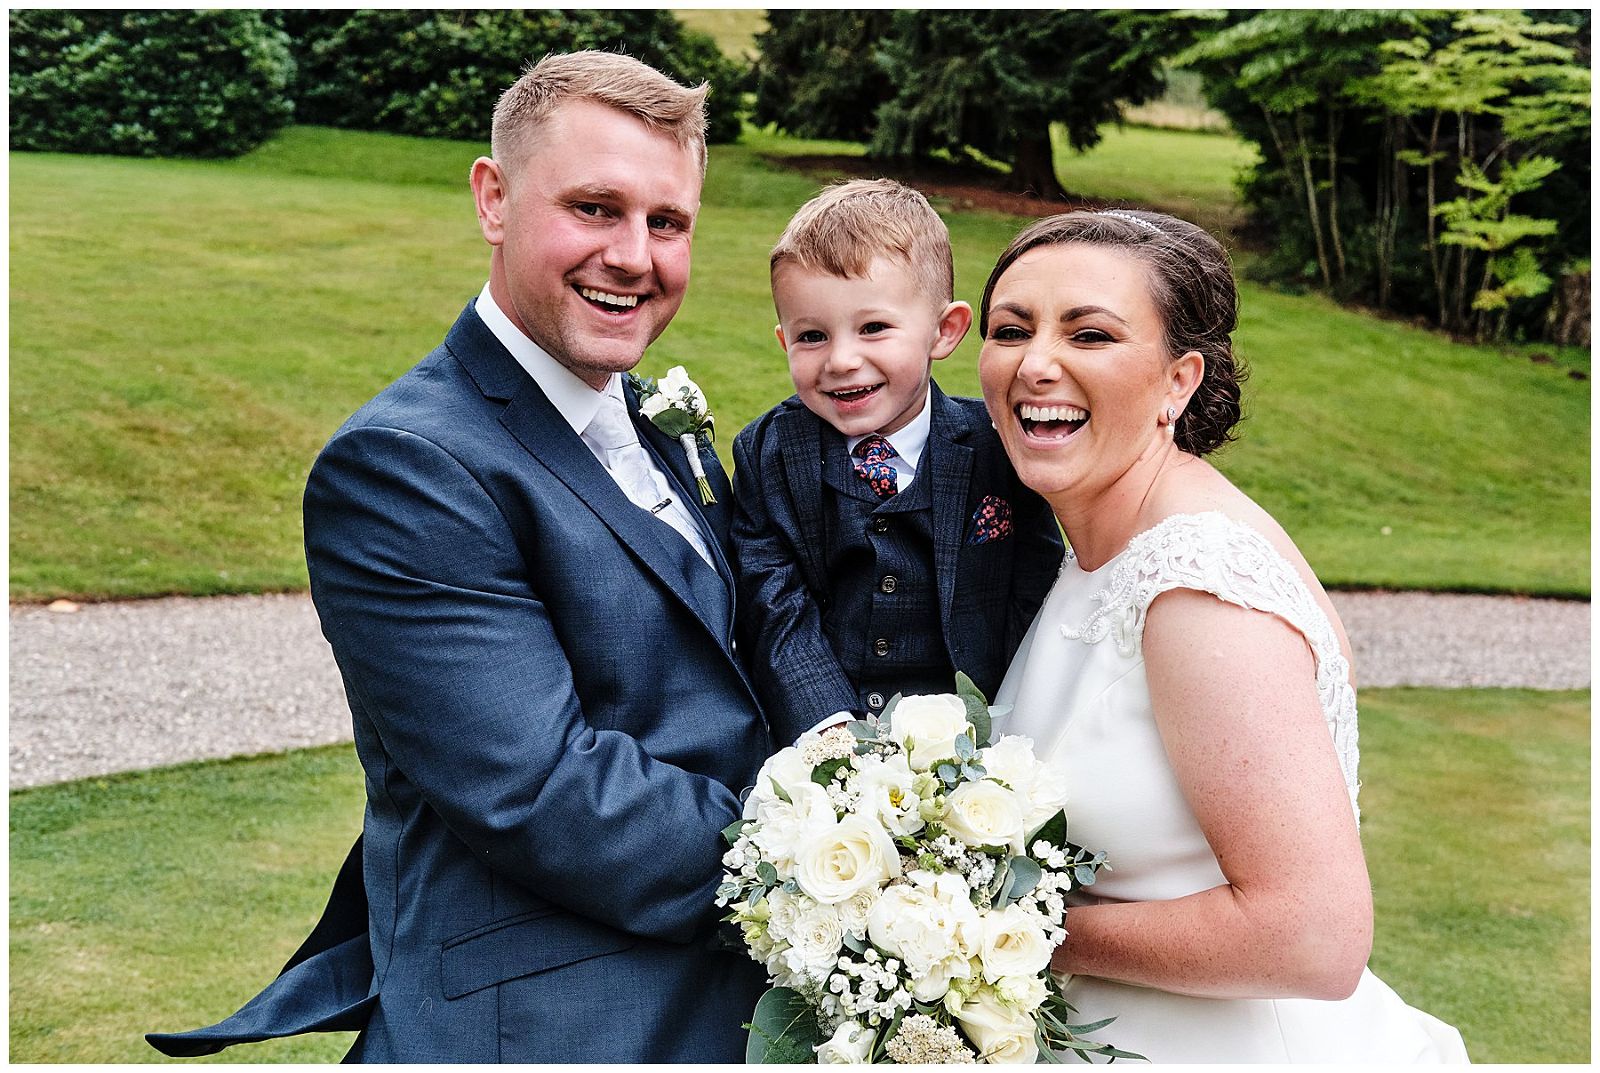 Relaxed family photographs in the grounds at Hawkstone Hall in Shrewsbury by Documentary Wedding Photographer Stuart James